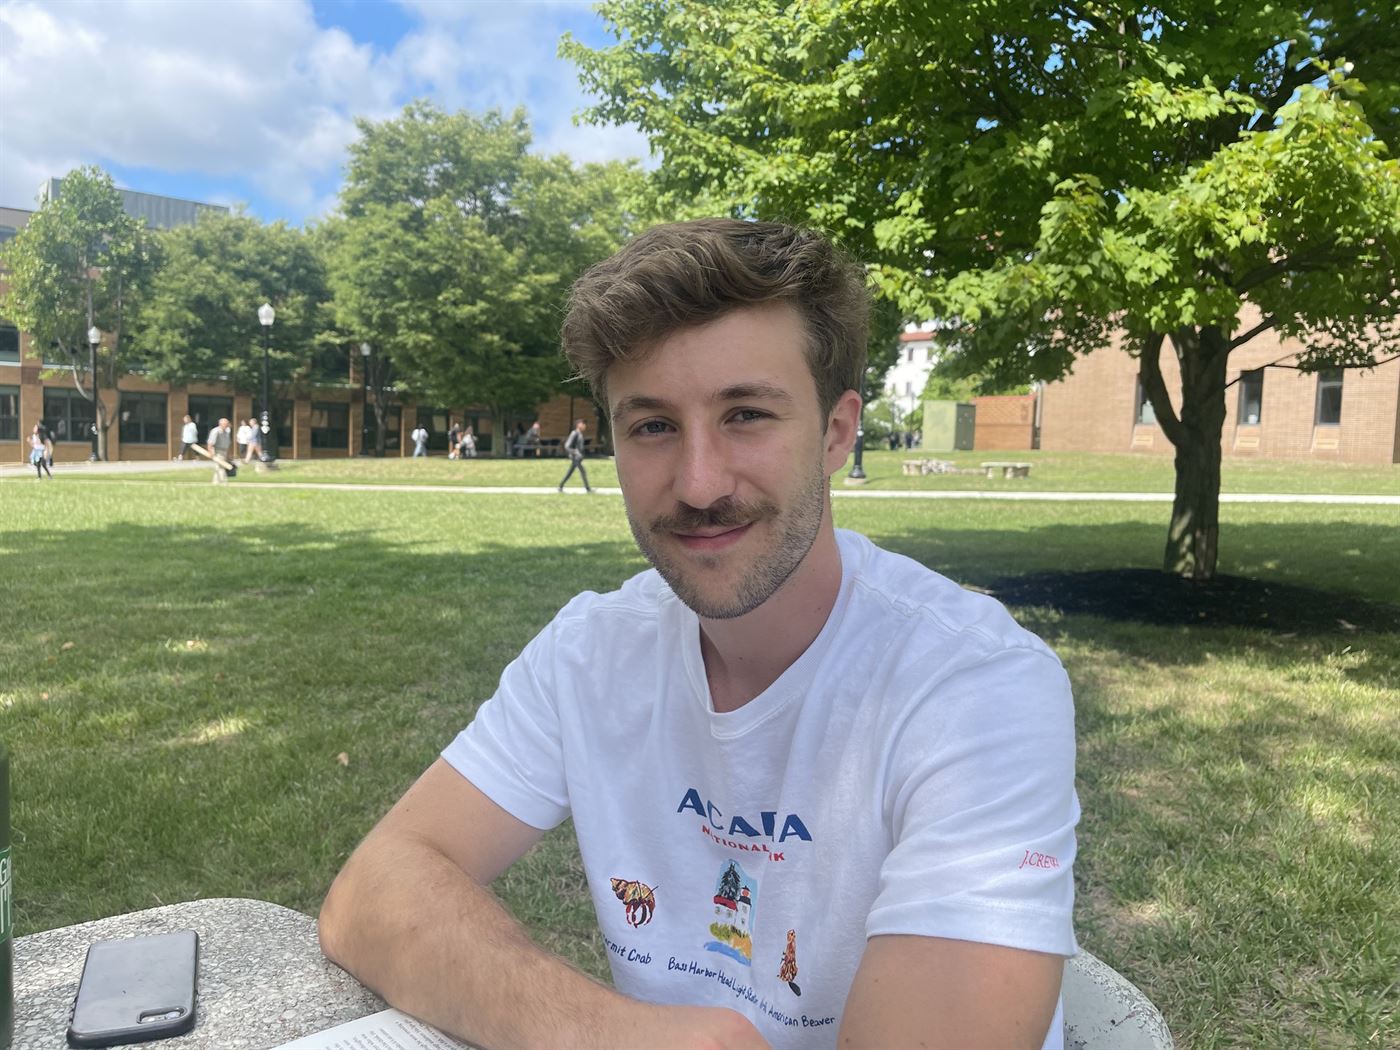 Hunter Coa, a senior communication studies major, says the parking traffic situation affected his decision of not buying a parking pass. Jennifer Portorreal | The Montclarion